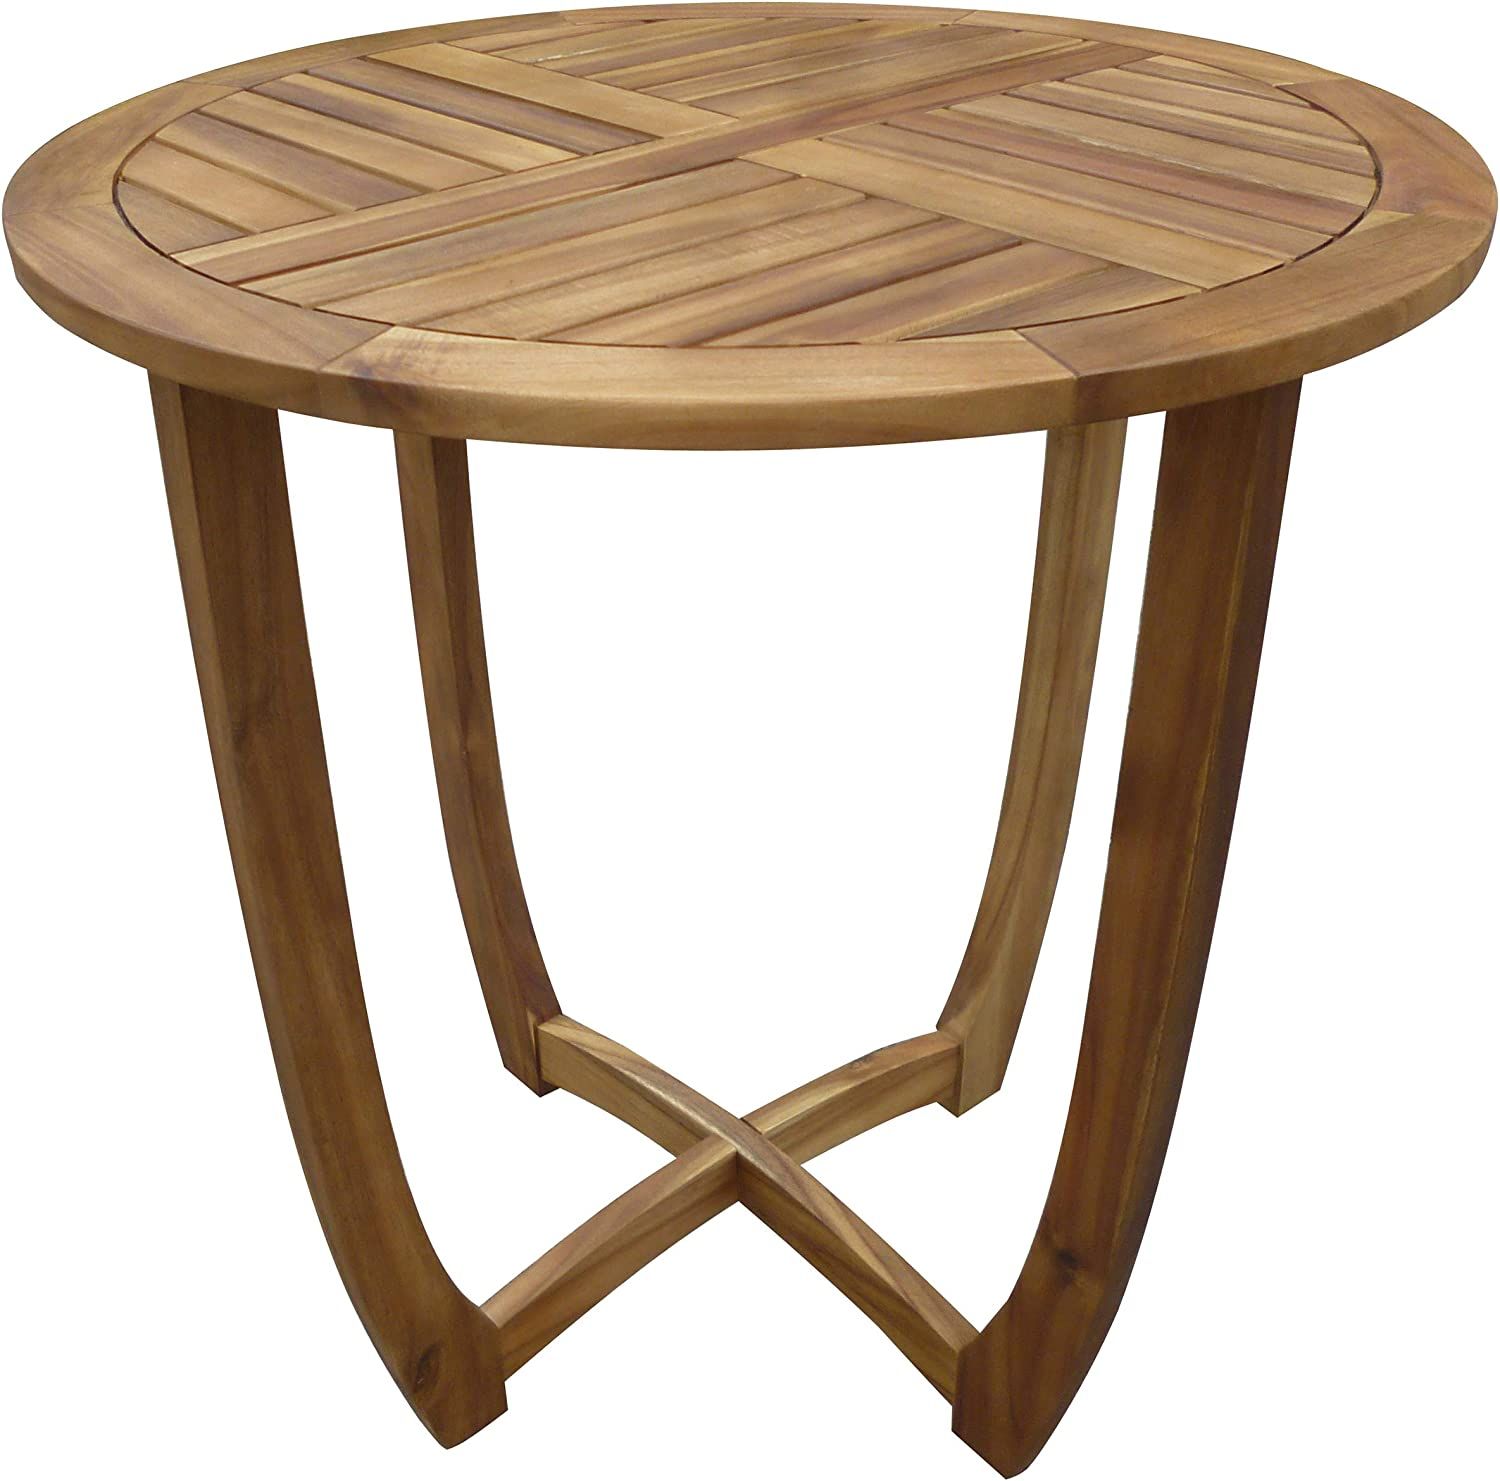 Christopher Knight Home Carina Accent Round Table, Teak Finish Brown | Amazon (US)